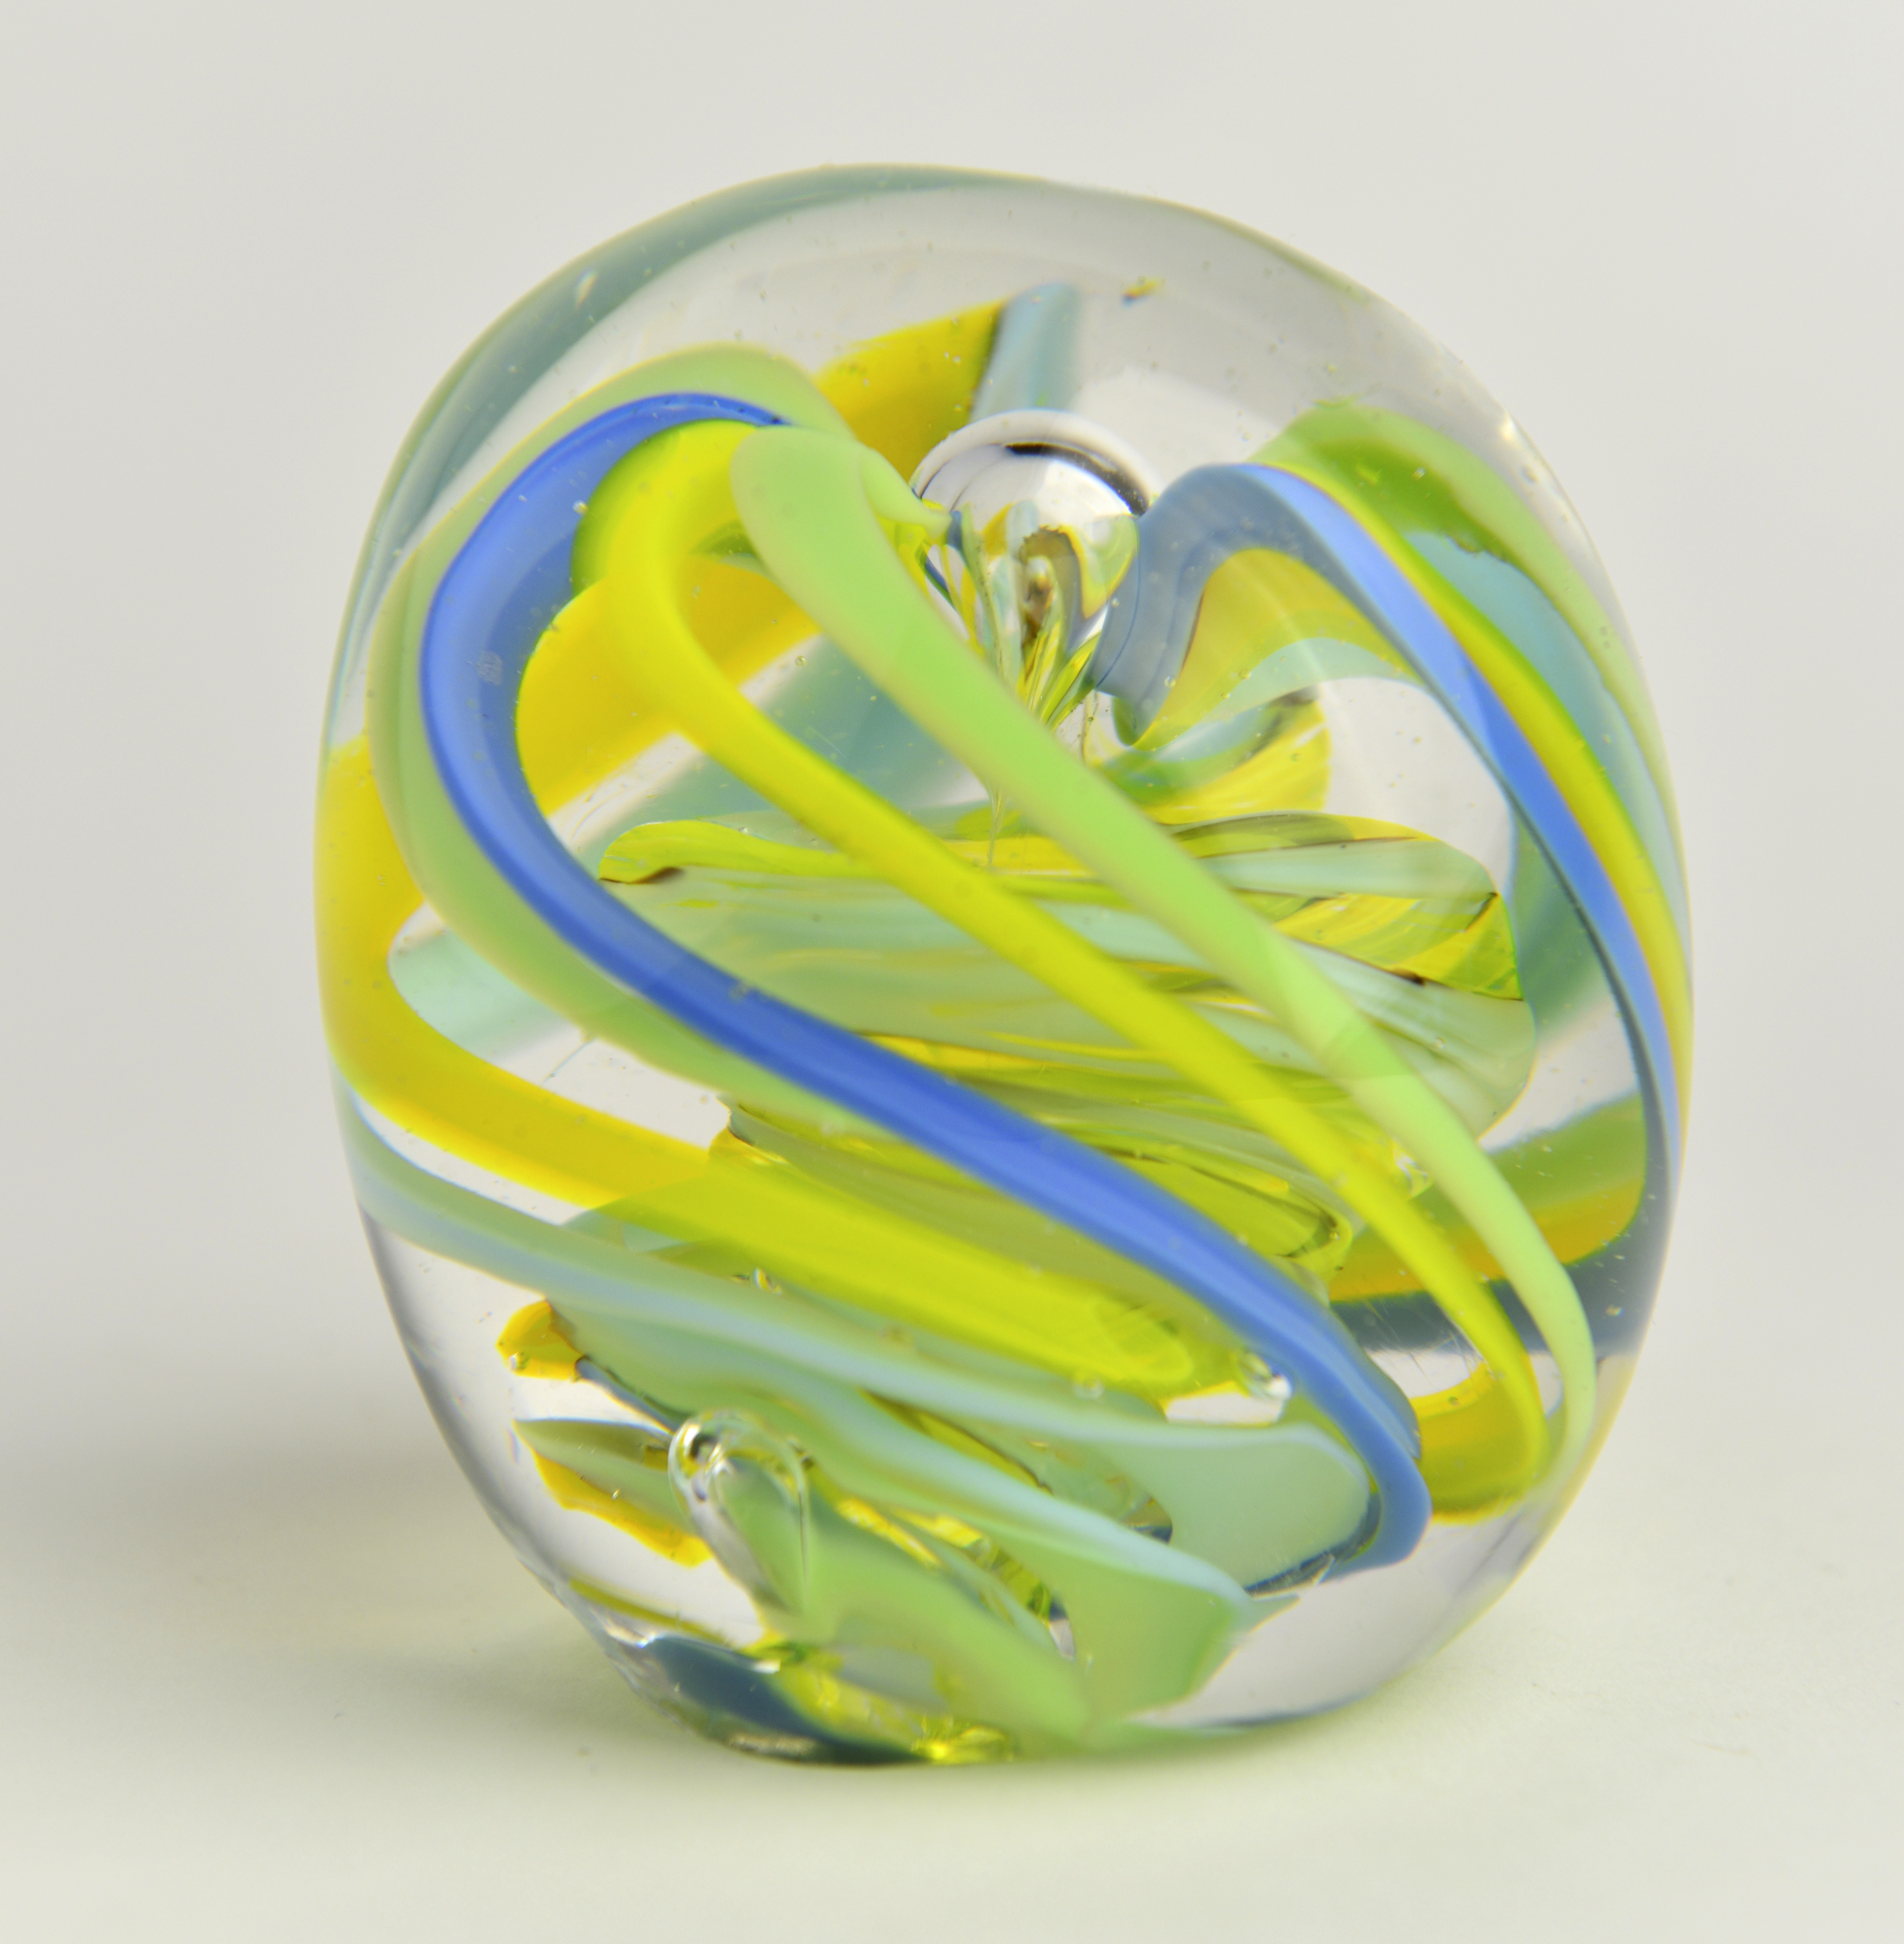 Blue, Yellow and Green Tornado Paperweight